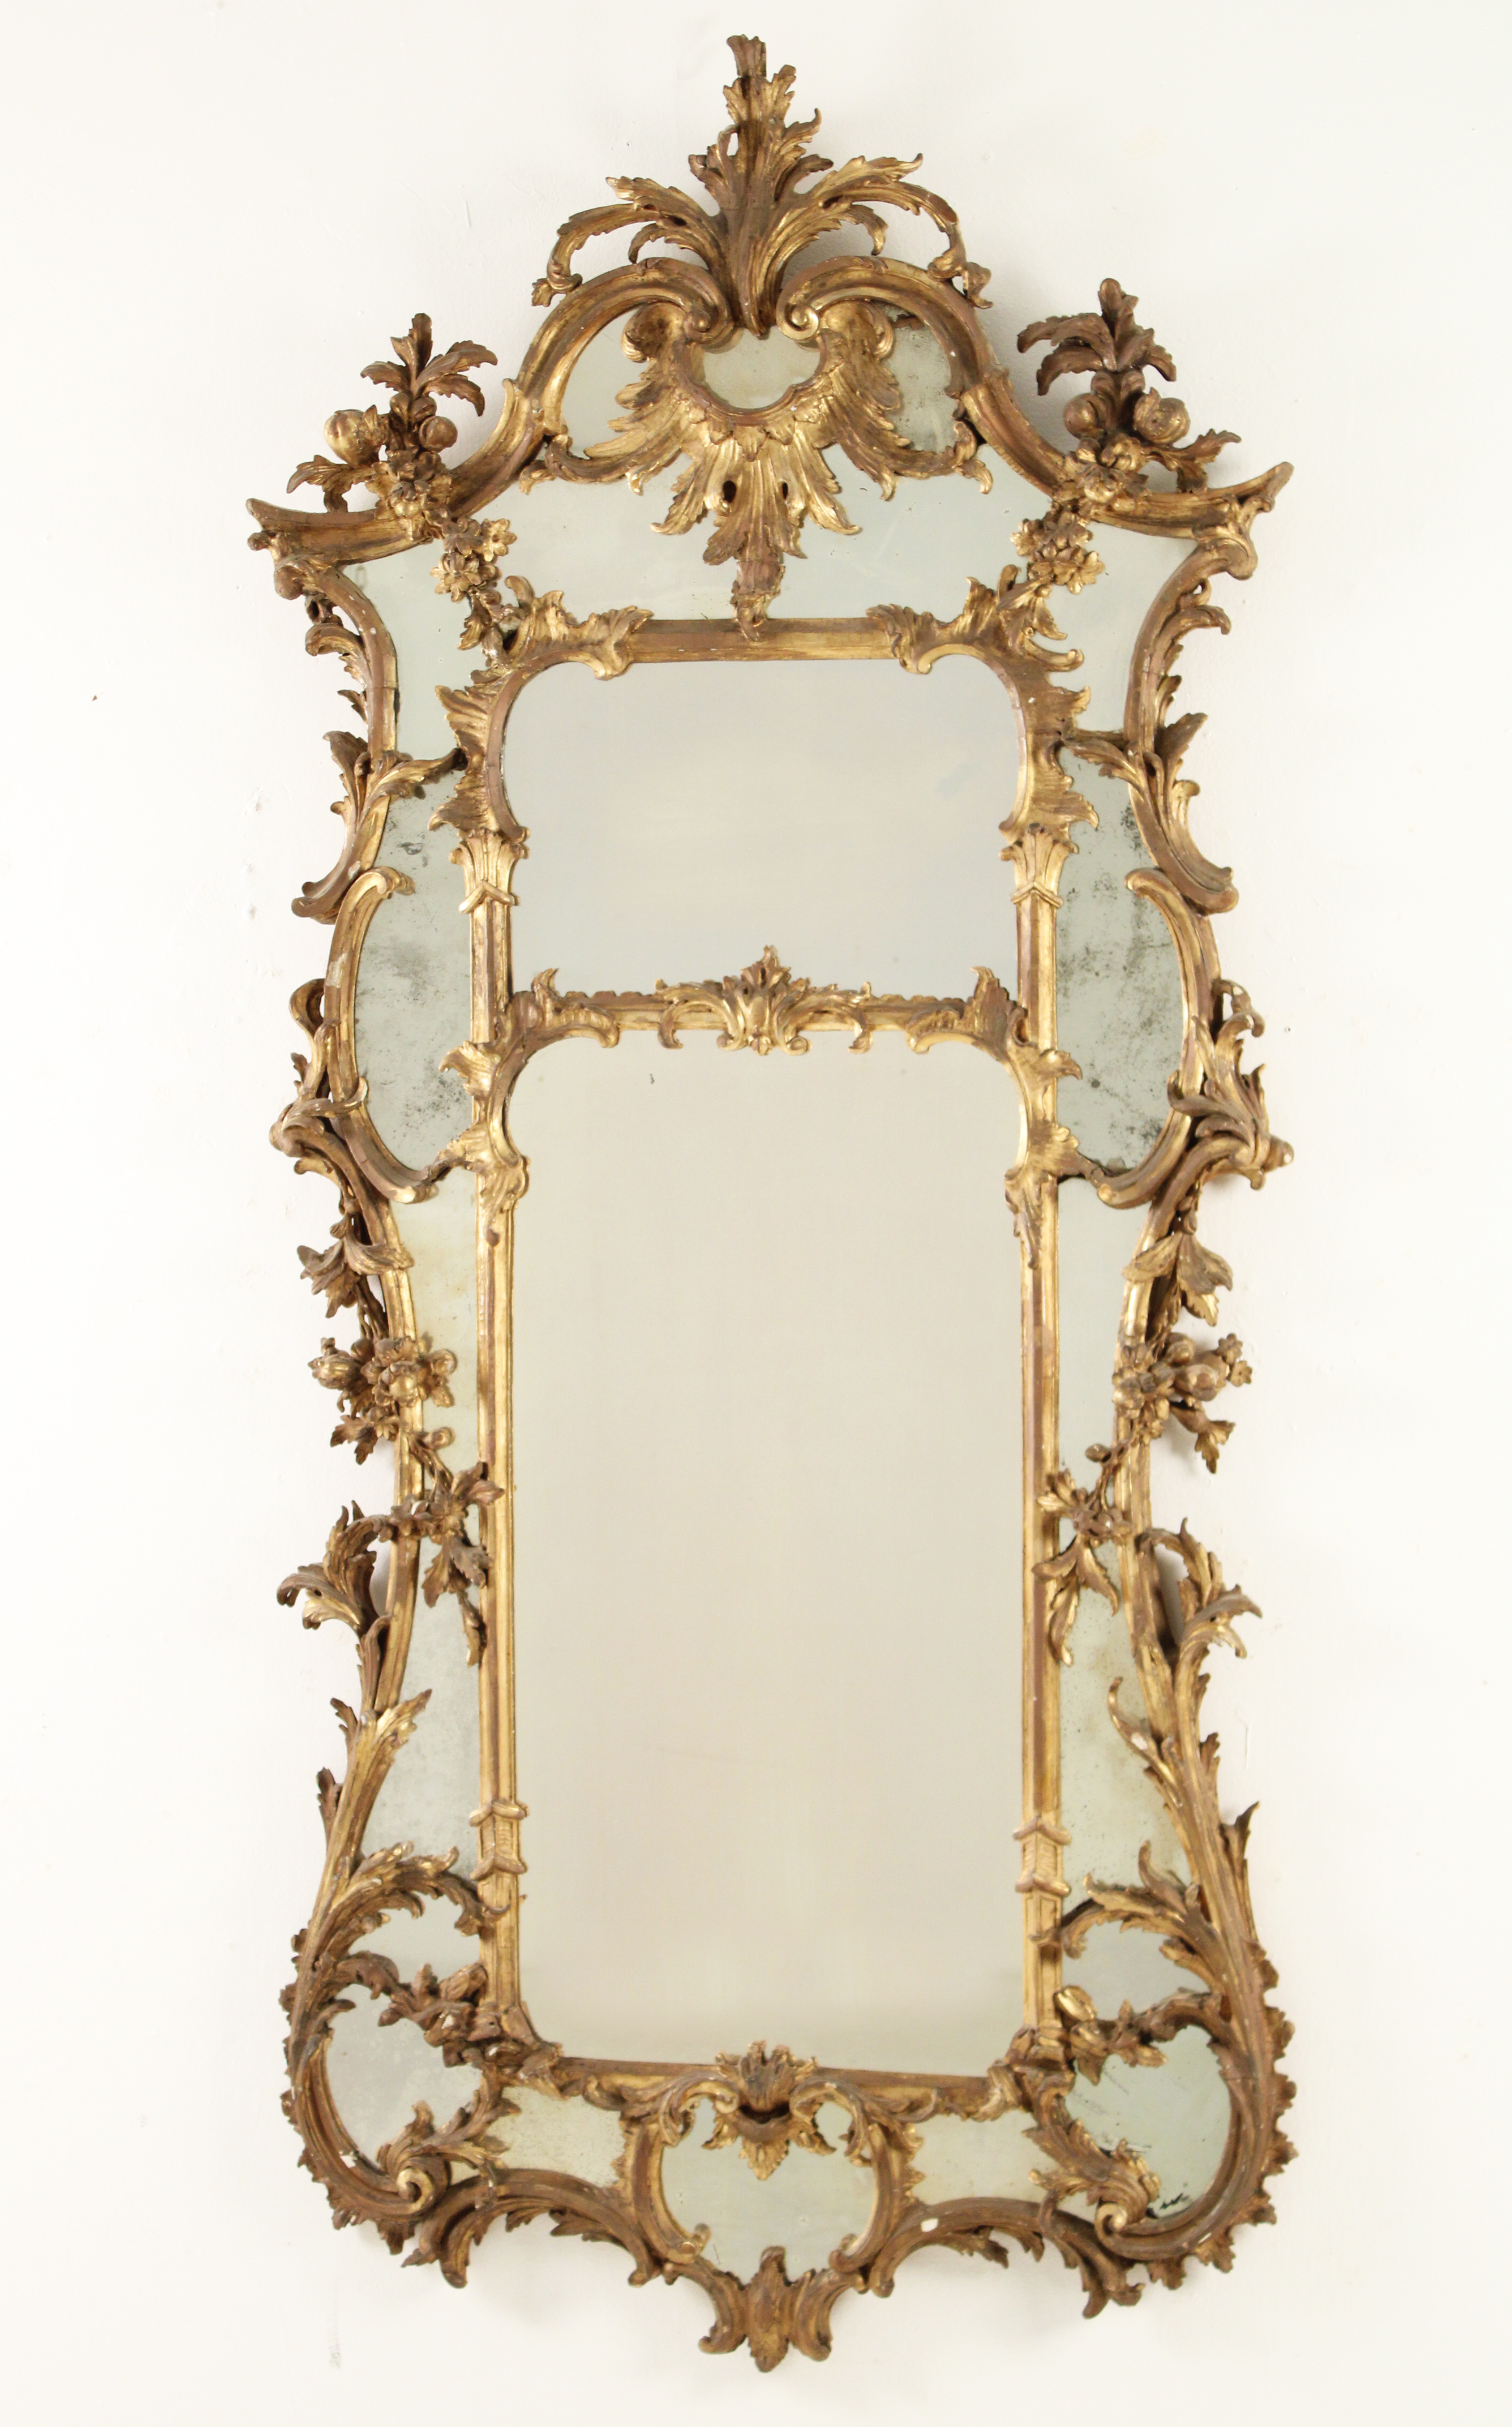 GRAND LOUIS XV STYLE MIRROR, EARLY